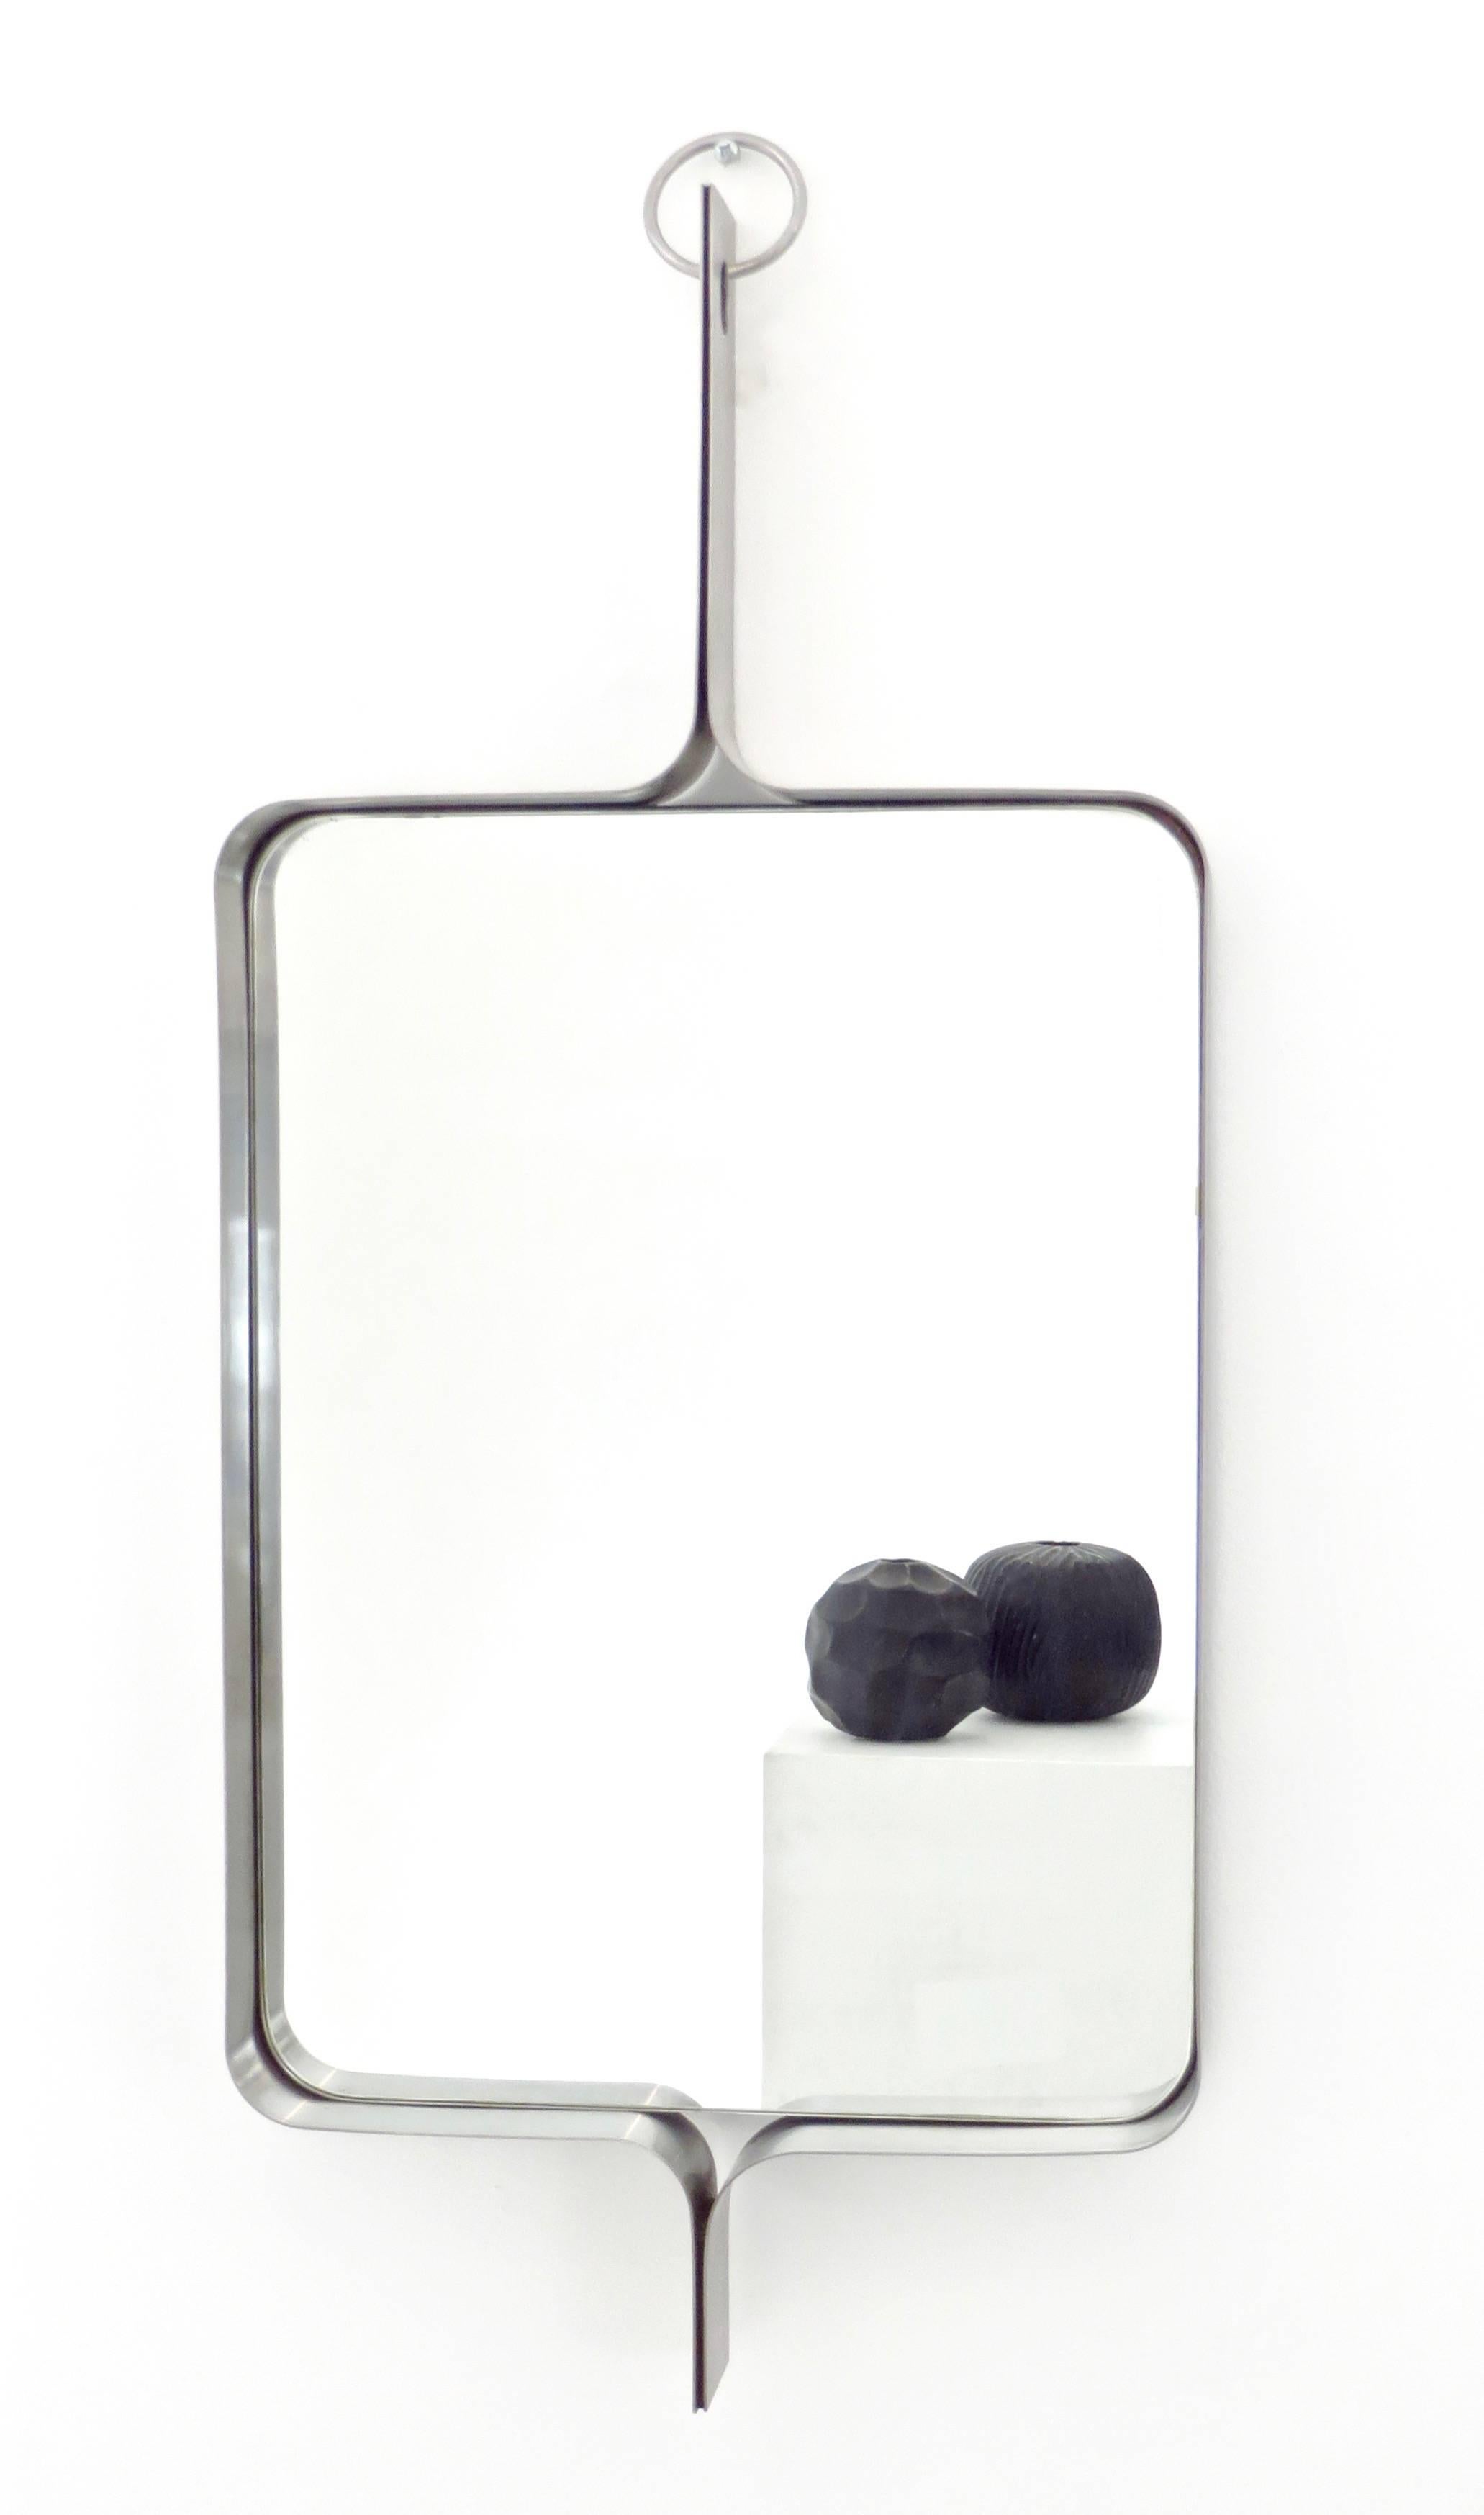 French stainless steel rectangular mirror by Michel Boyer (1935- 2011).
Boyer was a designer and decorator. 
He opened and exhibited at the Galerie Rouve, rue Bonaparte in Paris from 1968. 
One of his most famous interiors was the interiors of